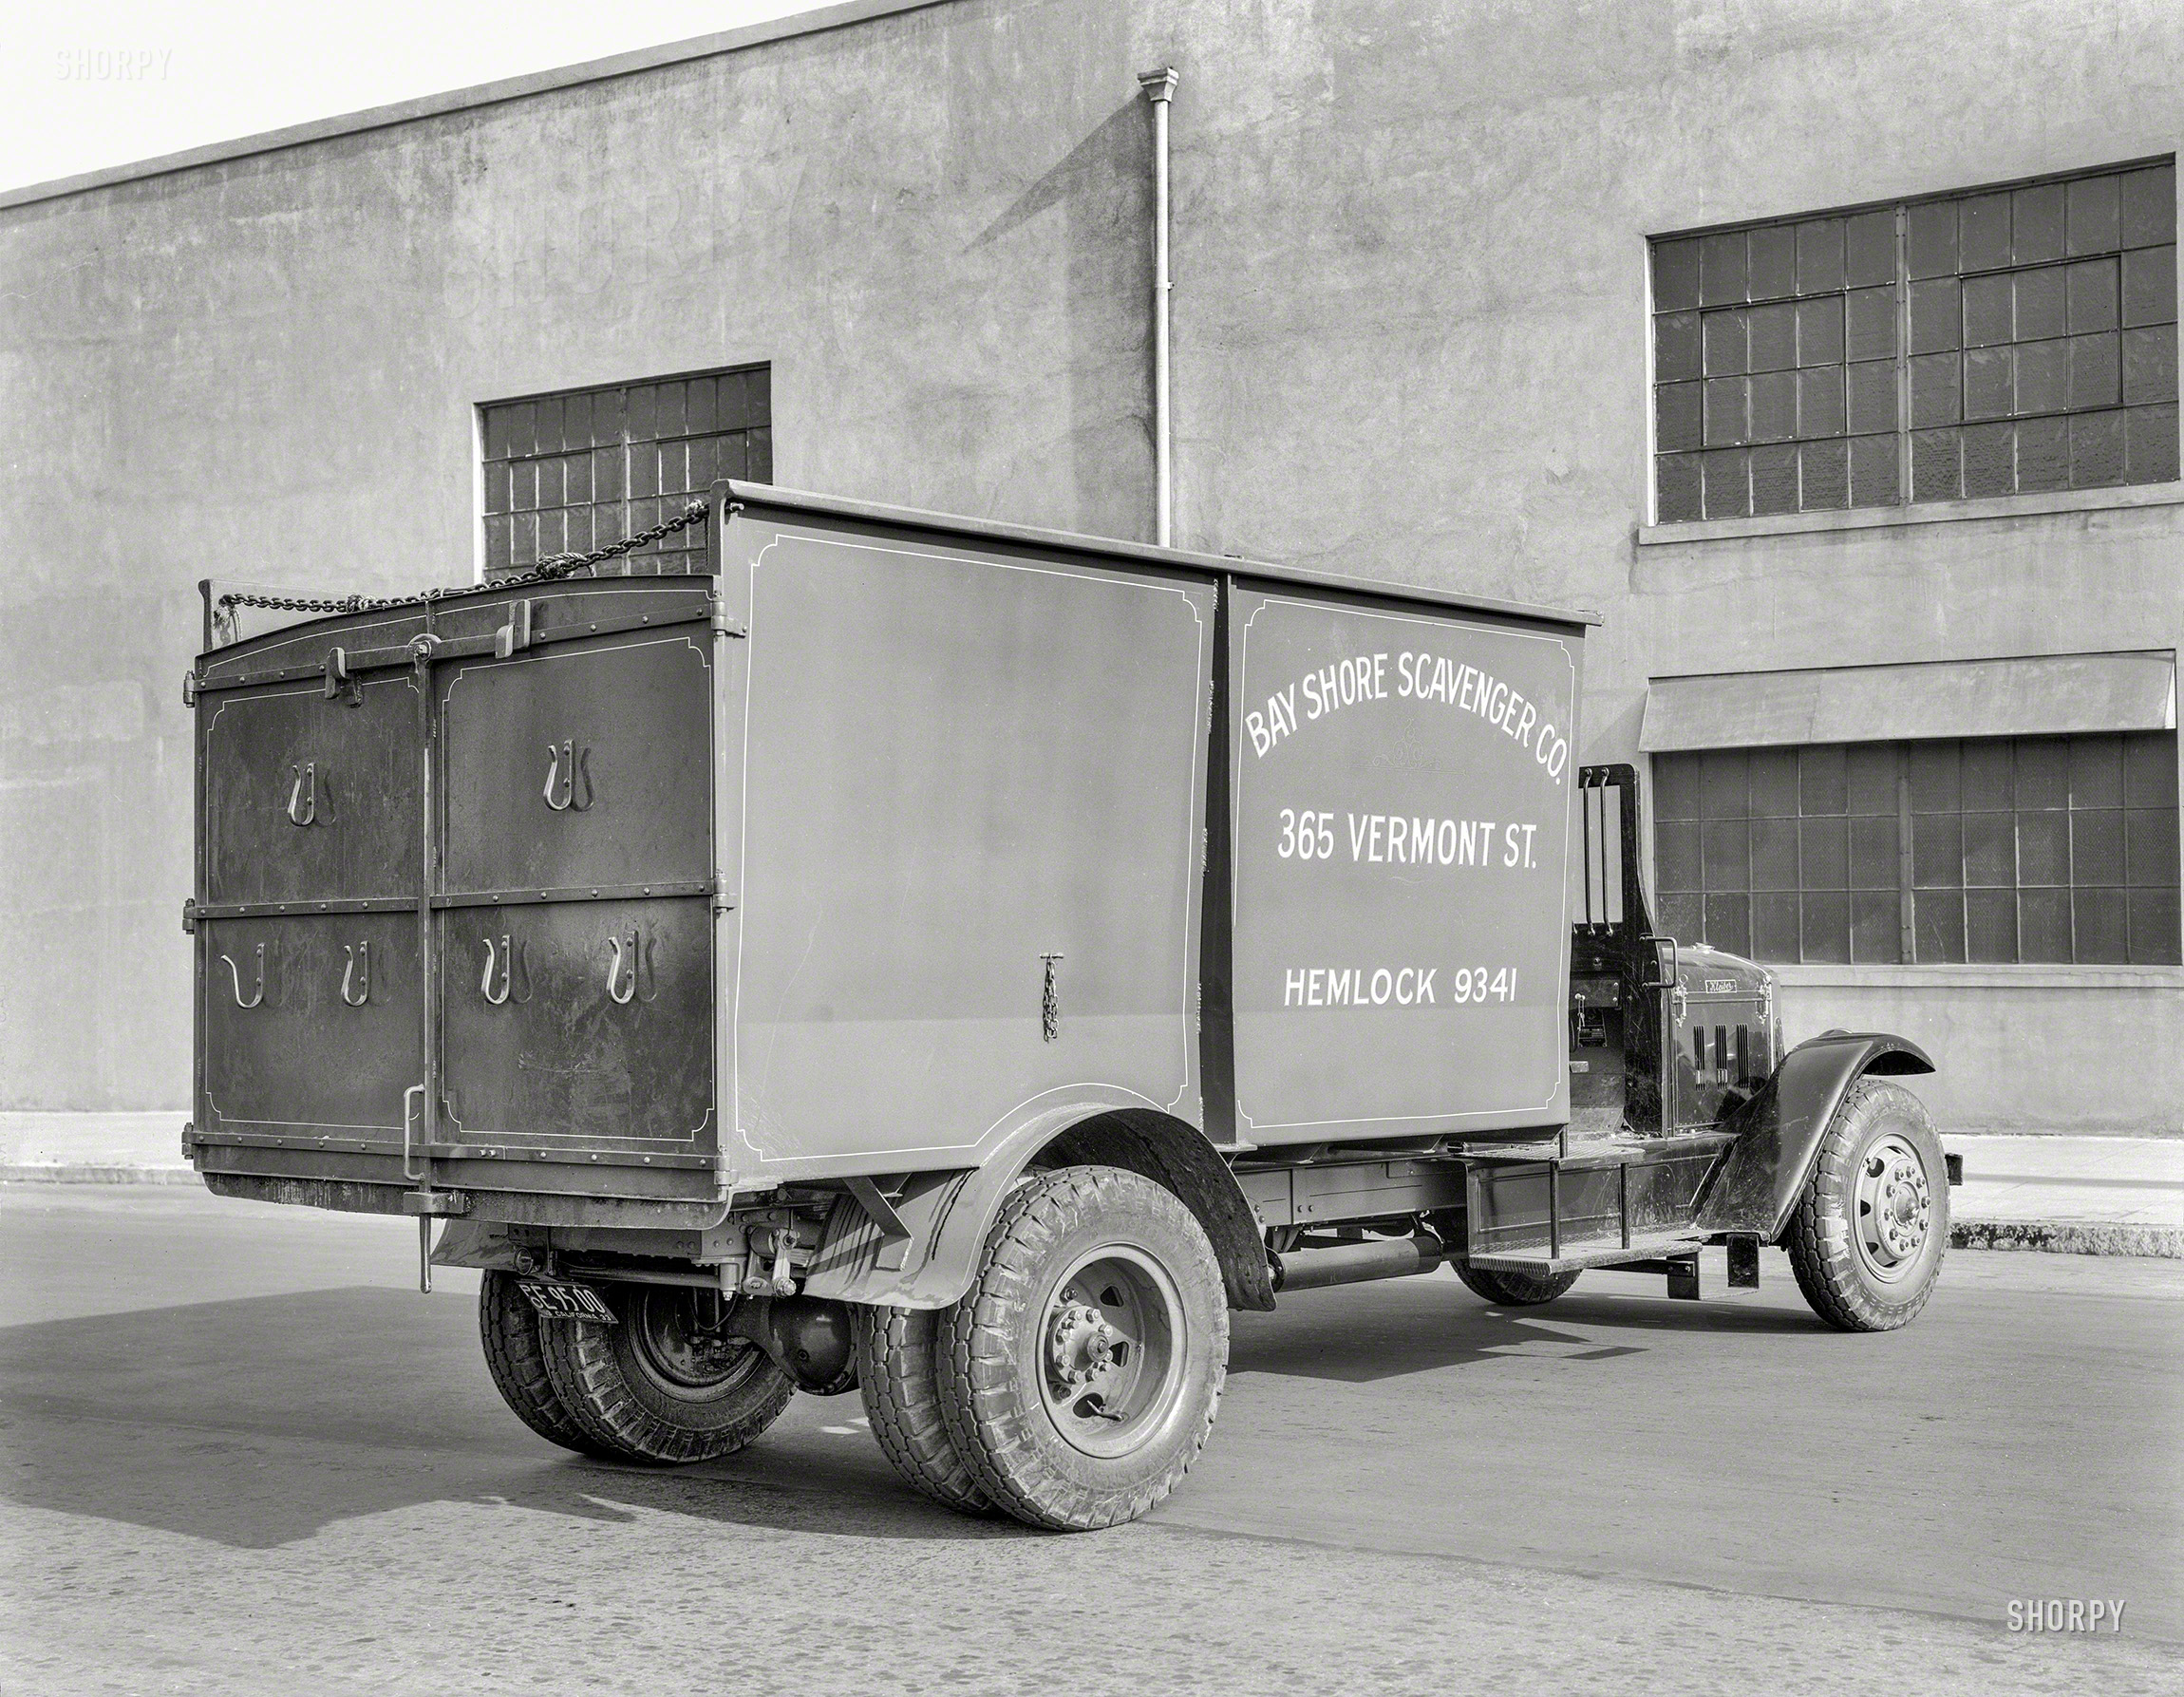 October 1933. "Kleiber motor truck -- Bay Shore Scavenger Co." An ominous-looking conveyance made all the more foreboding by that toxic telephone exchange. 8x10 acetate negative by Christopher Helin. View full size.